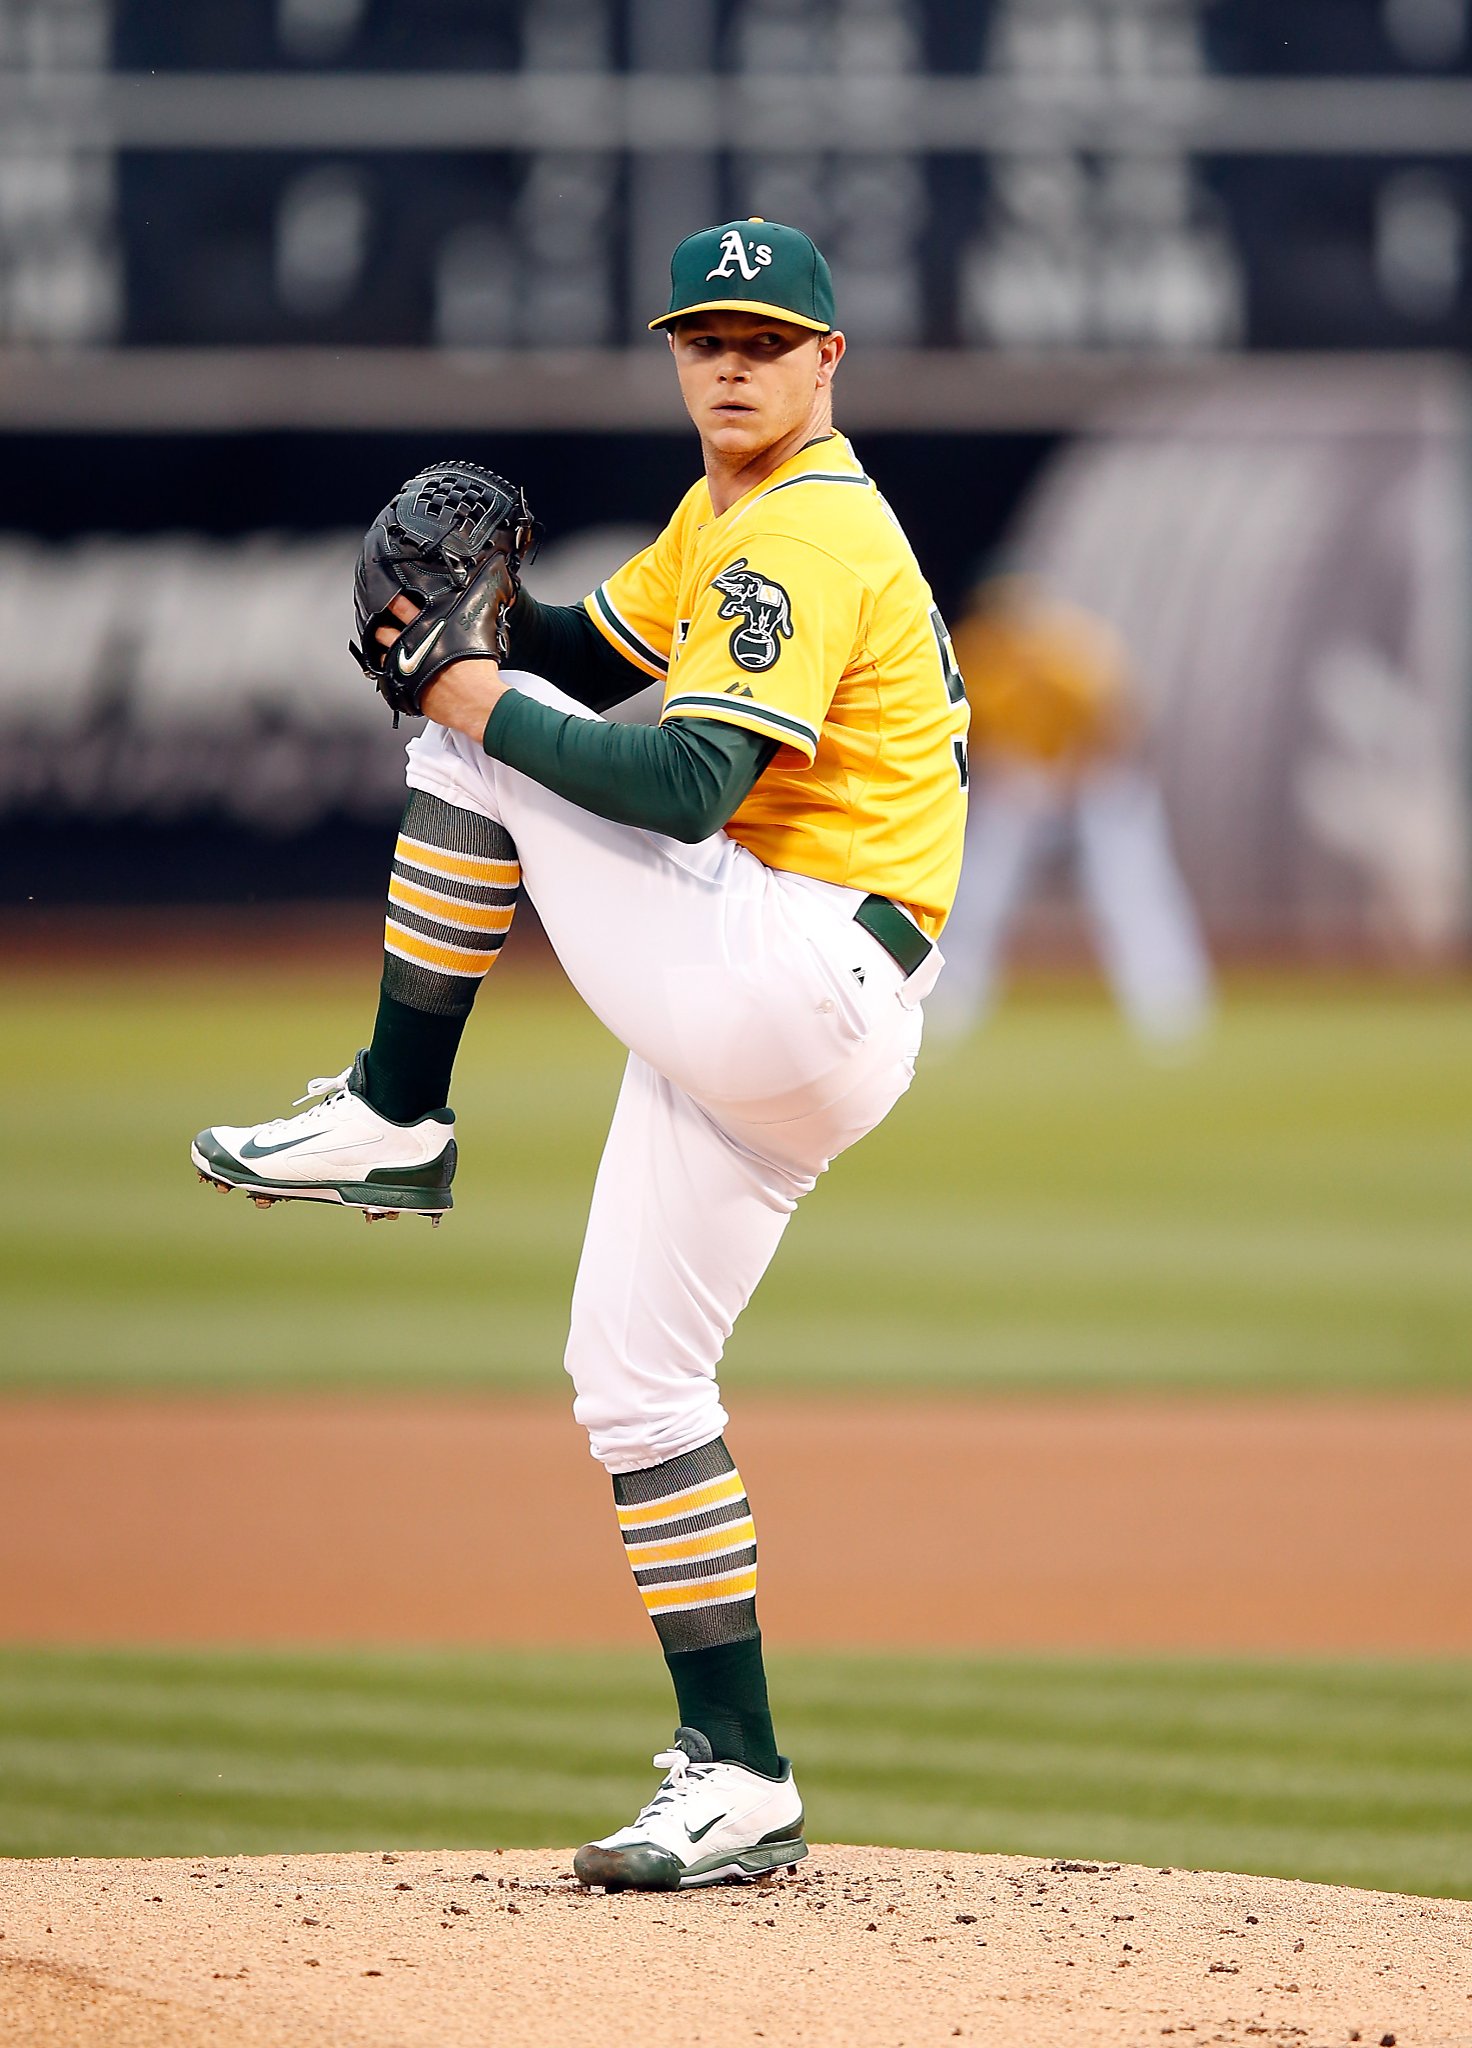 MLB All-Star Game 2015: Oakland A's Stephen Vogt and Sonny Gray named to AL  team - Athletics Nation